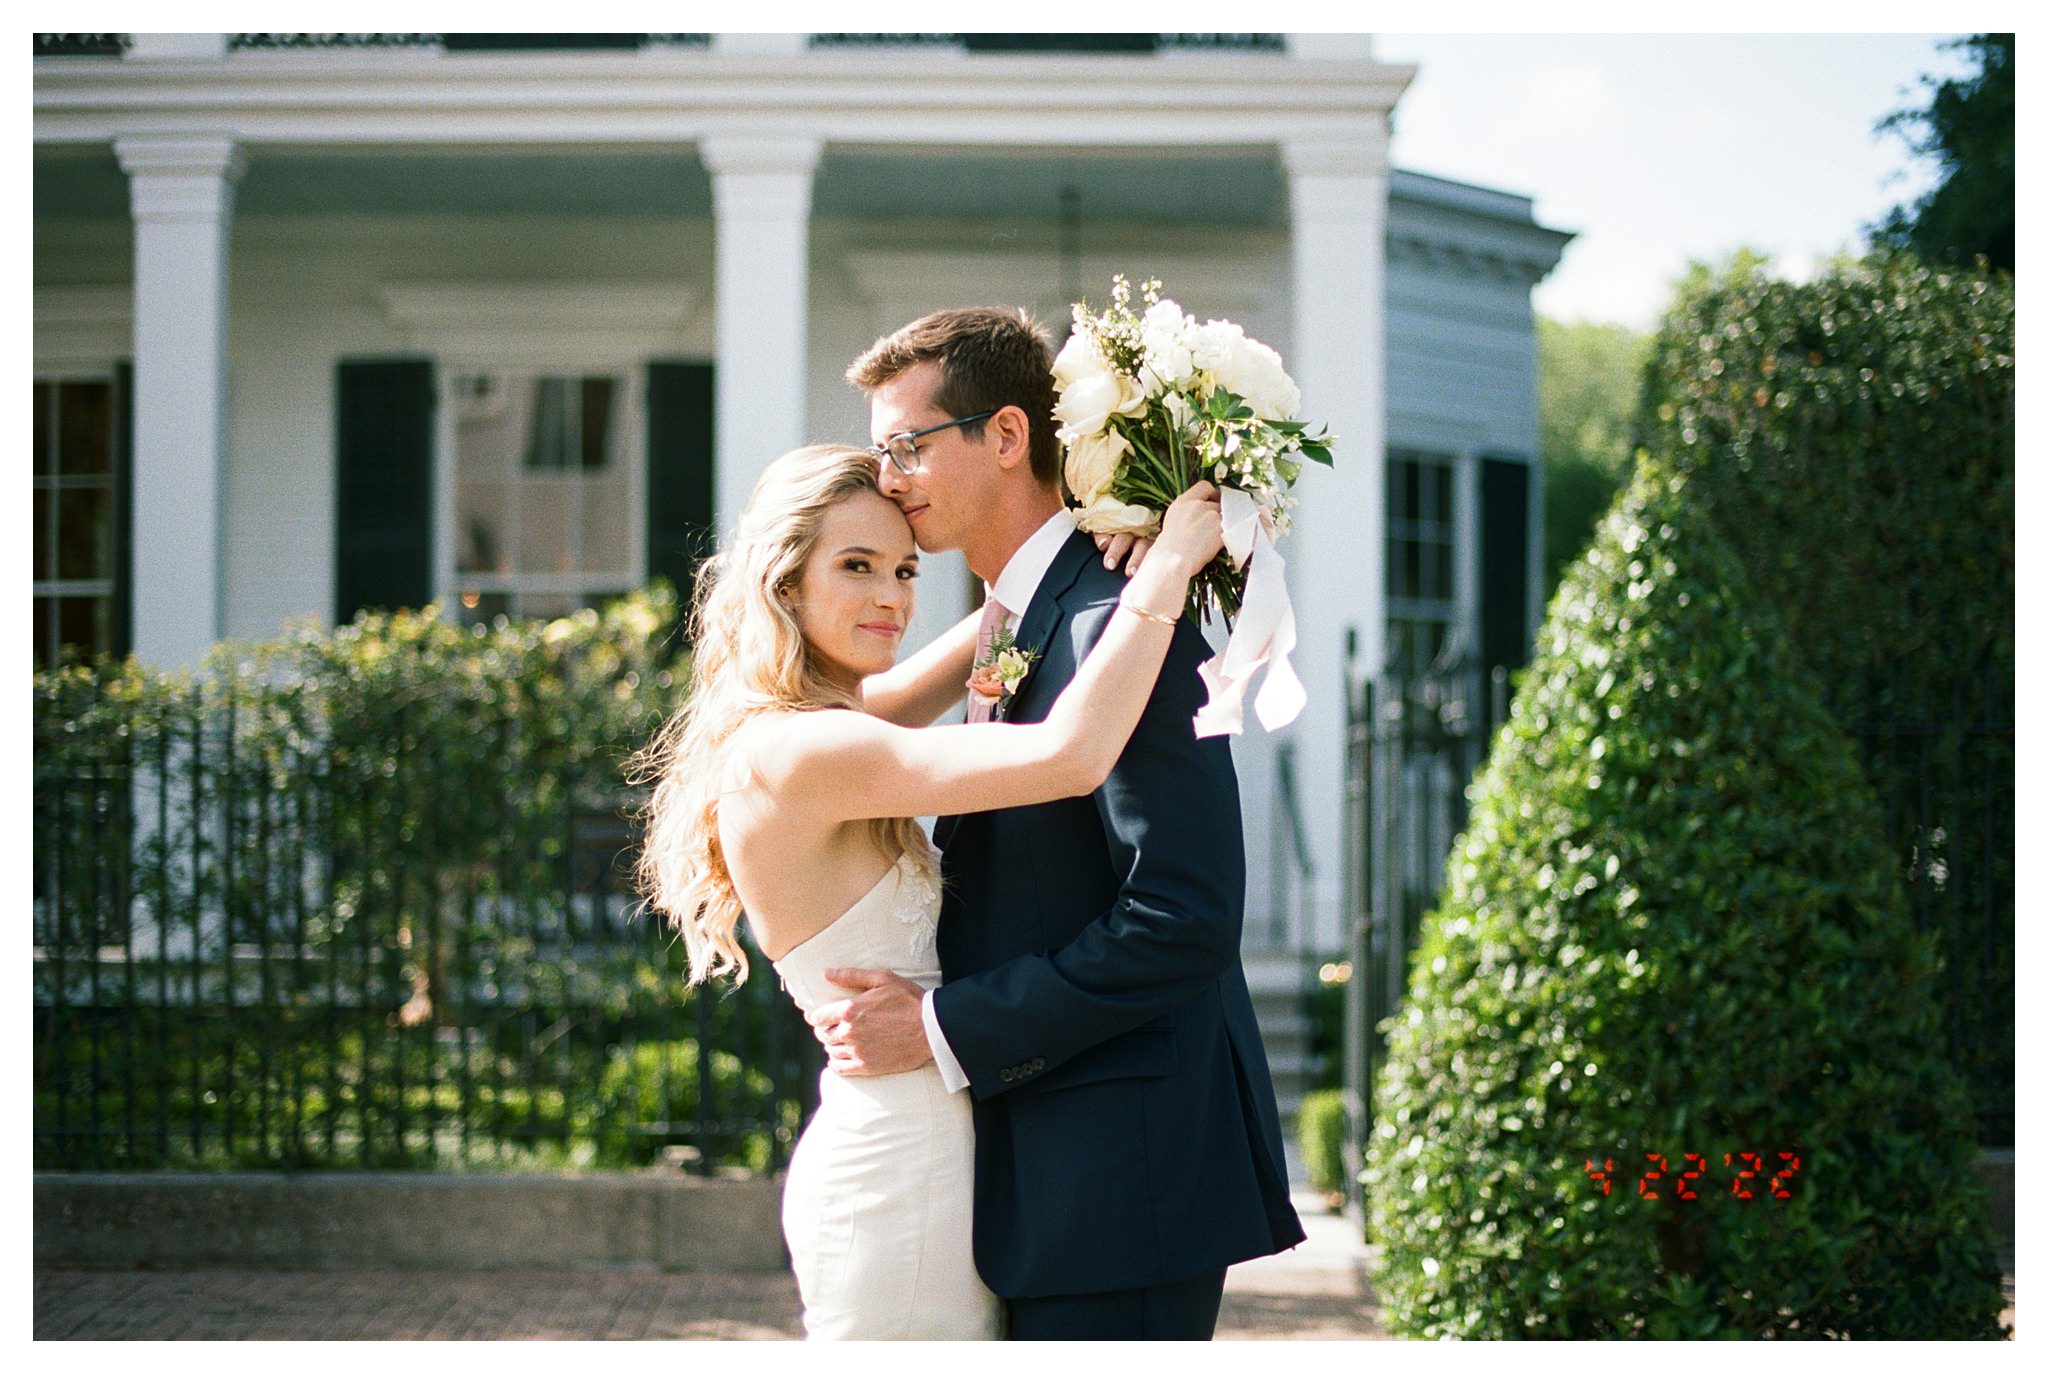 A couple stands in front of a White House for their New Orleans garden district wedding.